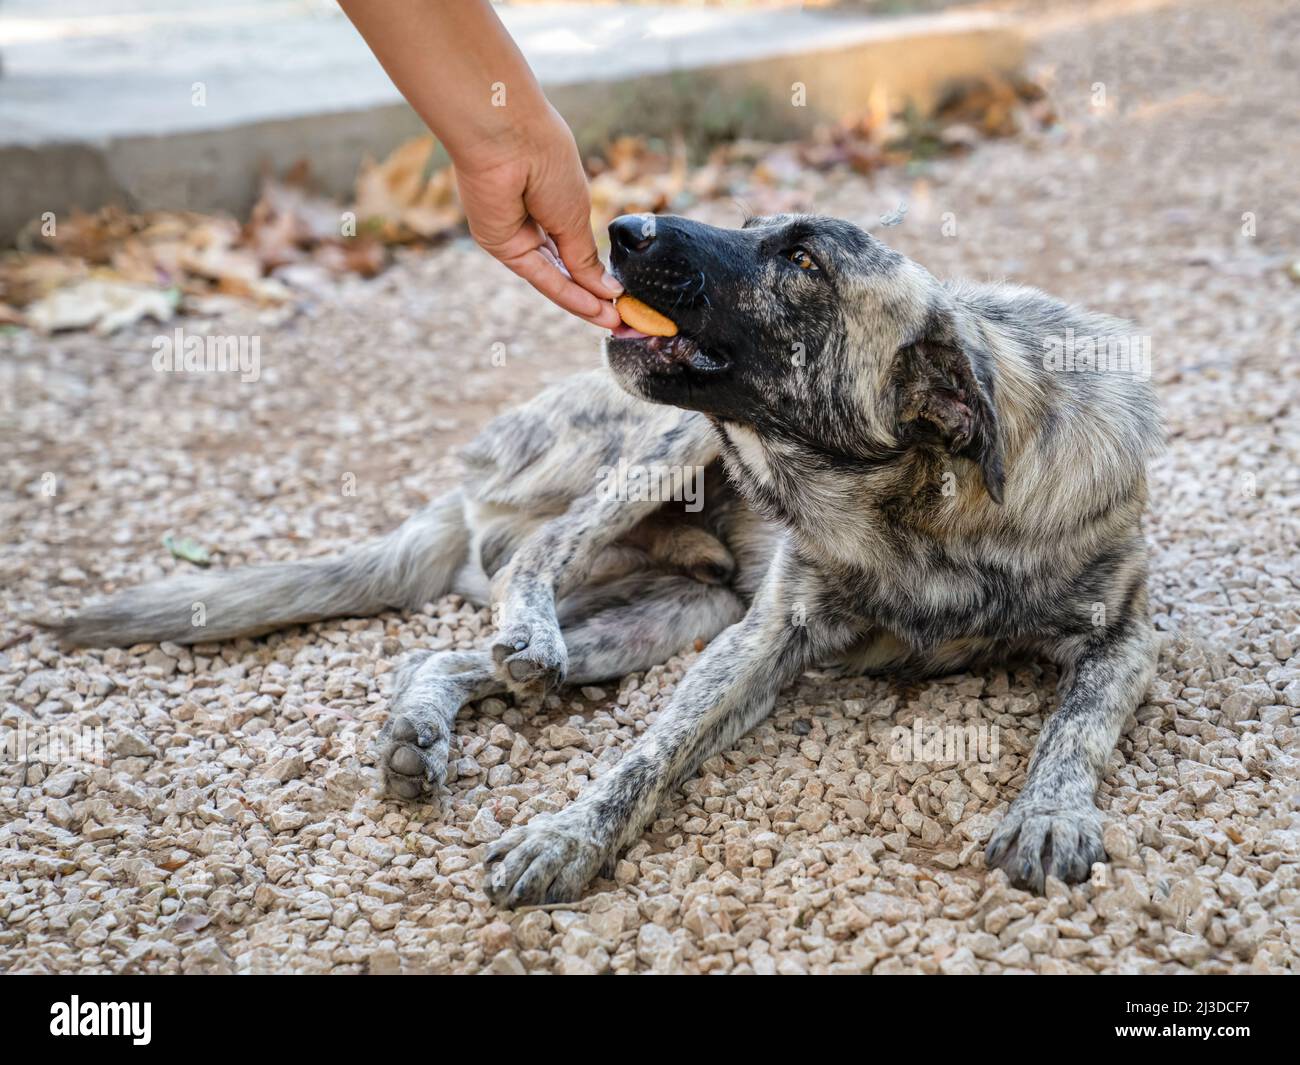 Stray dog of gray and white color lies on ground and takes food from hands of person. Woman feeds stray dog with her hand Stock Photo